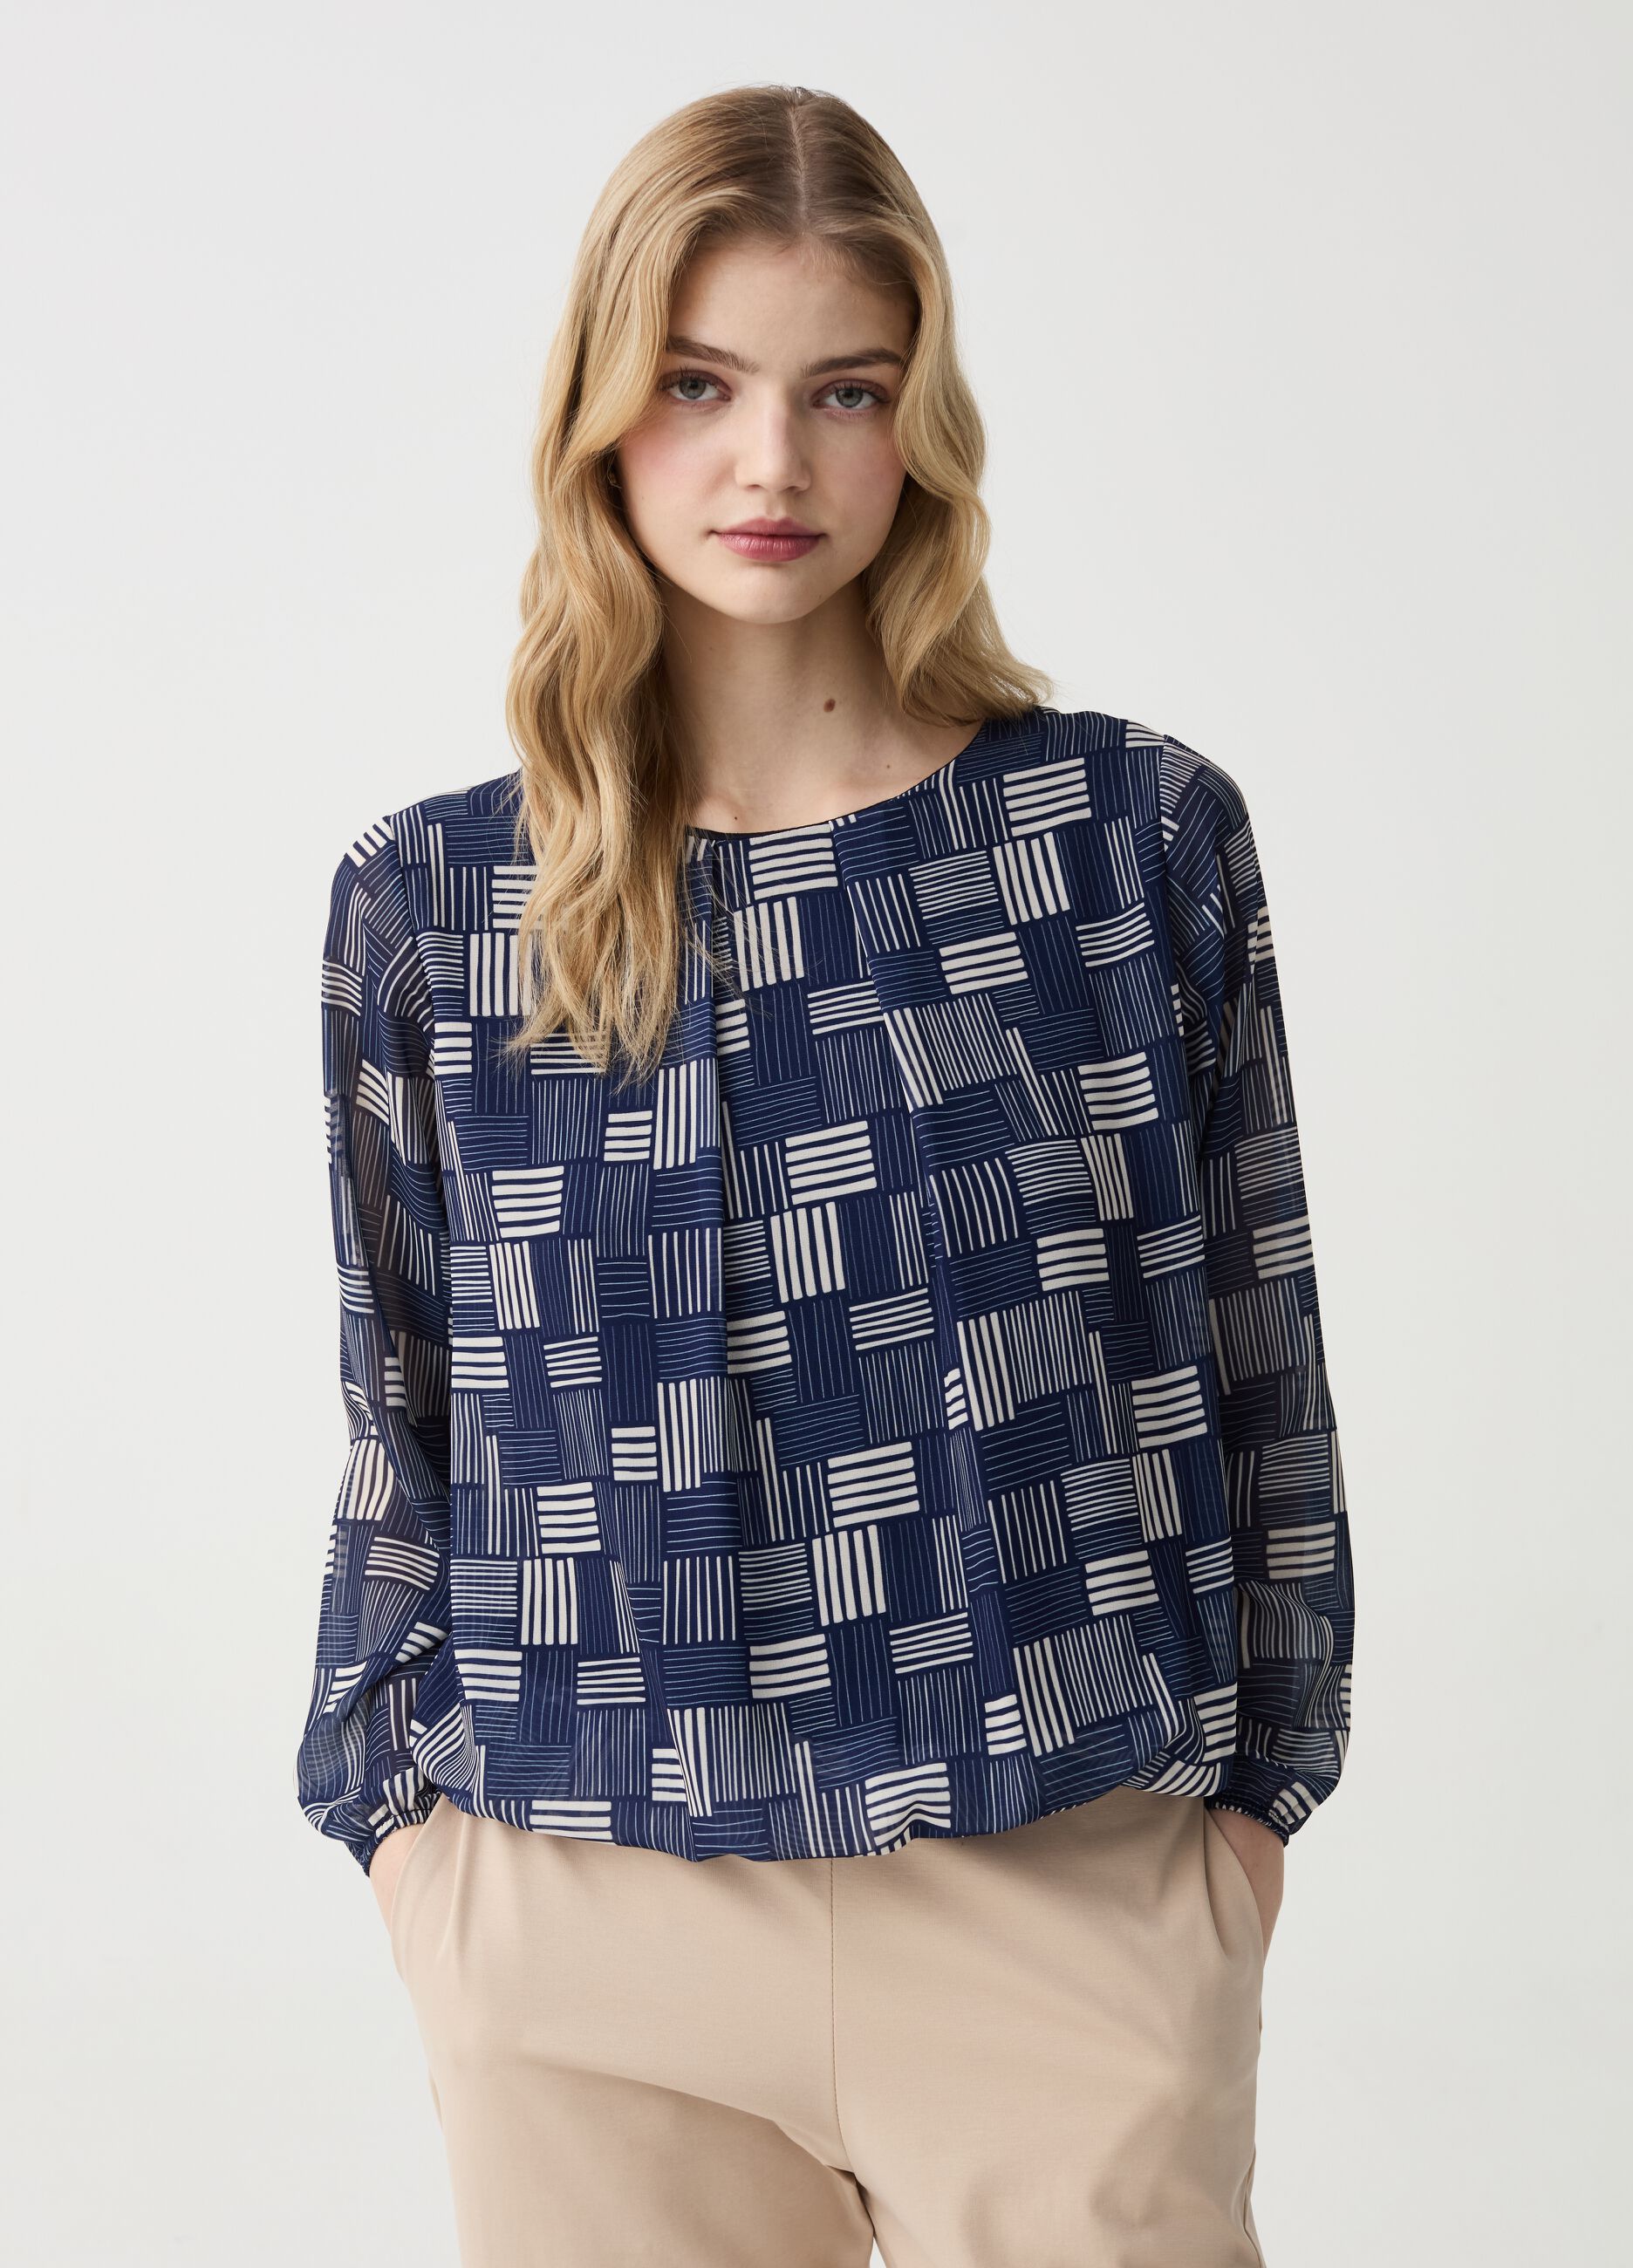 Blouse with interwoven check pattern